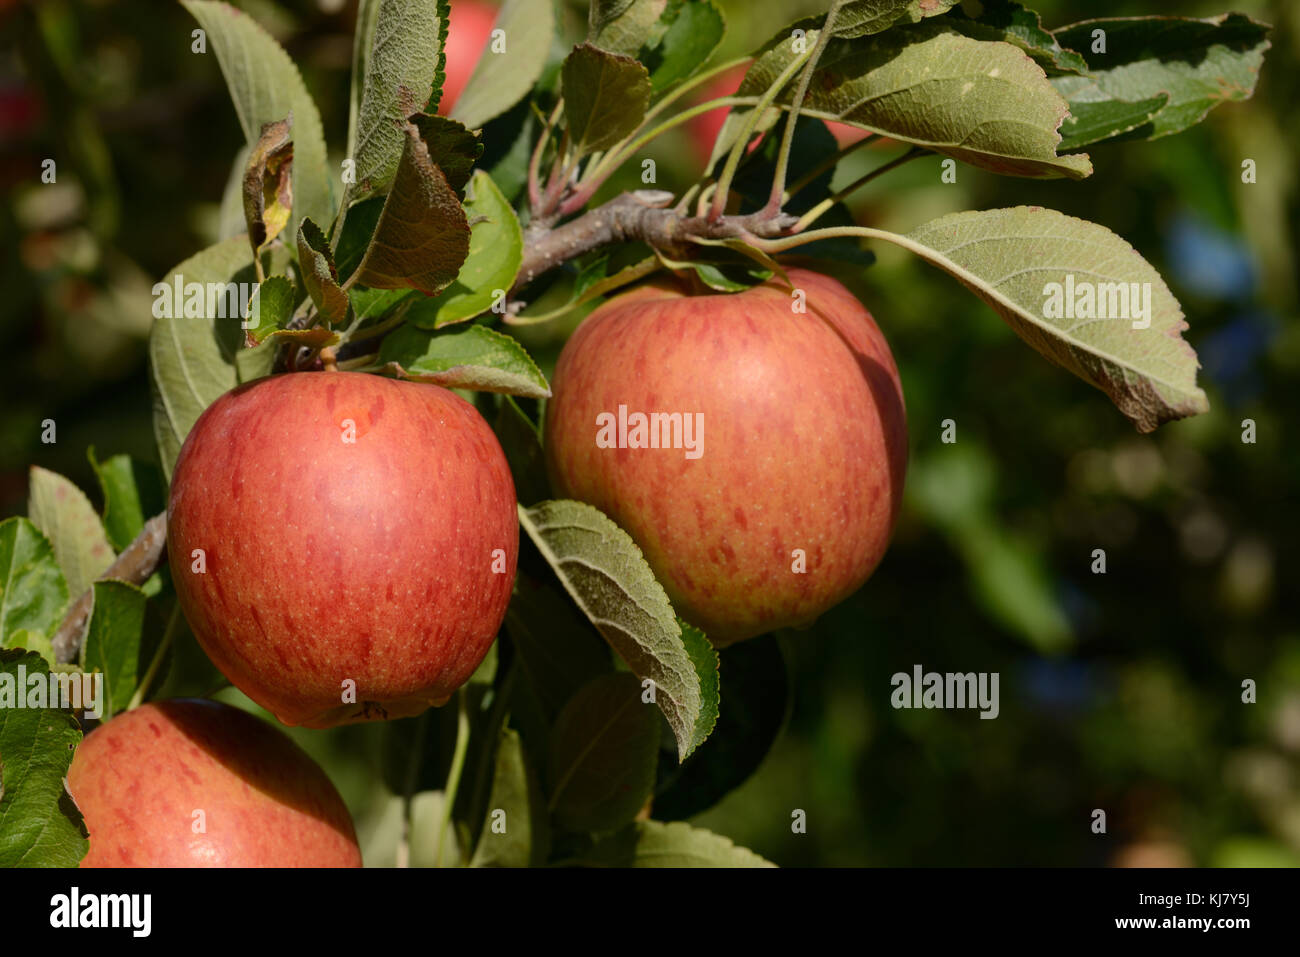 Braeburn apples ready to pick from an orchard in New Zealand Stock Photo